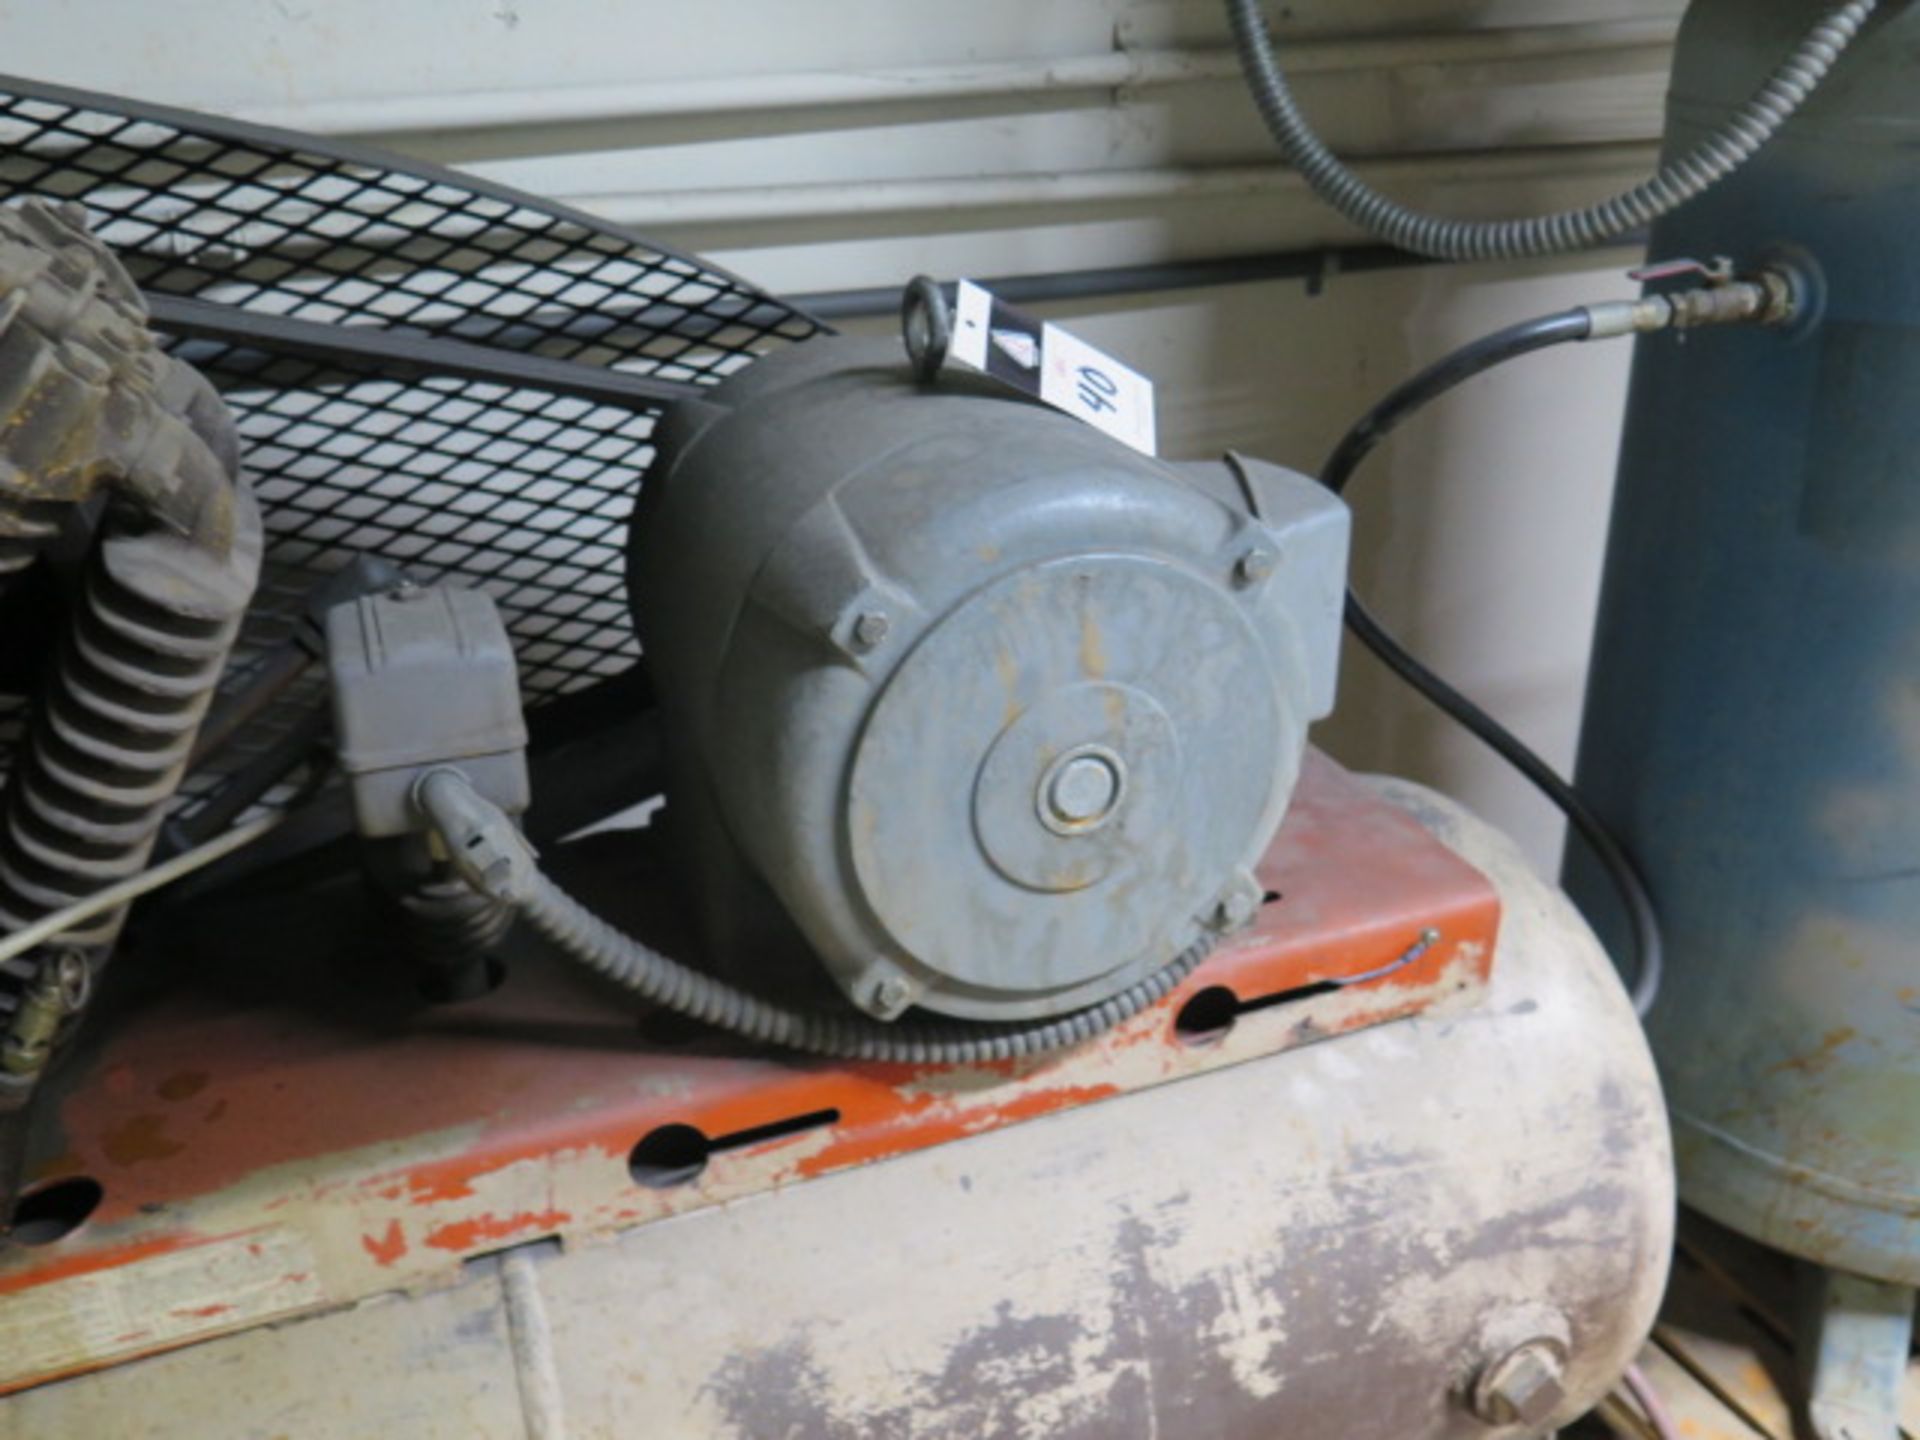 DeVilbiss 7.5Hp Horizontal Air Compressor w/ 3-Stage Pump, 80 Gallon Tank (CONDITION UNKNOWN) ( - Image 5 of 5